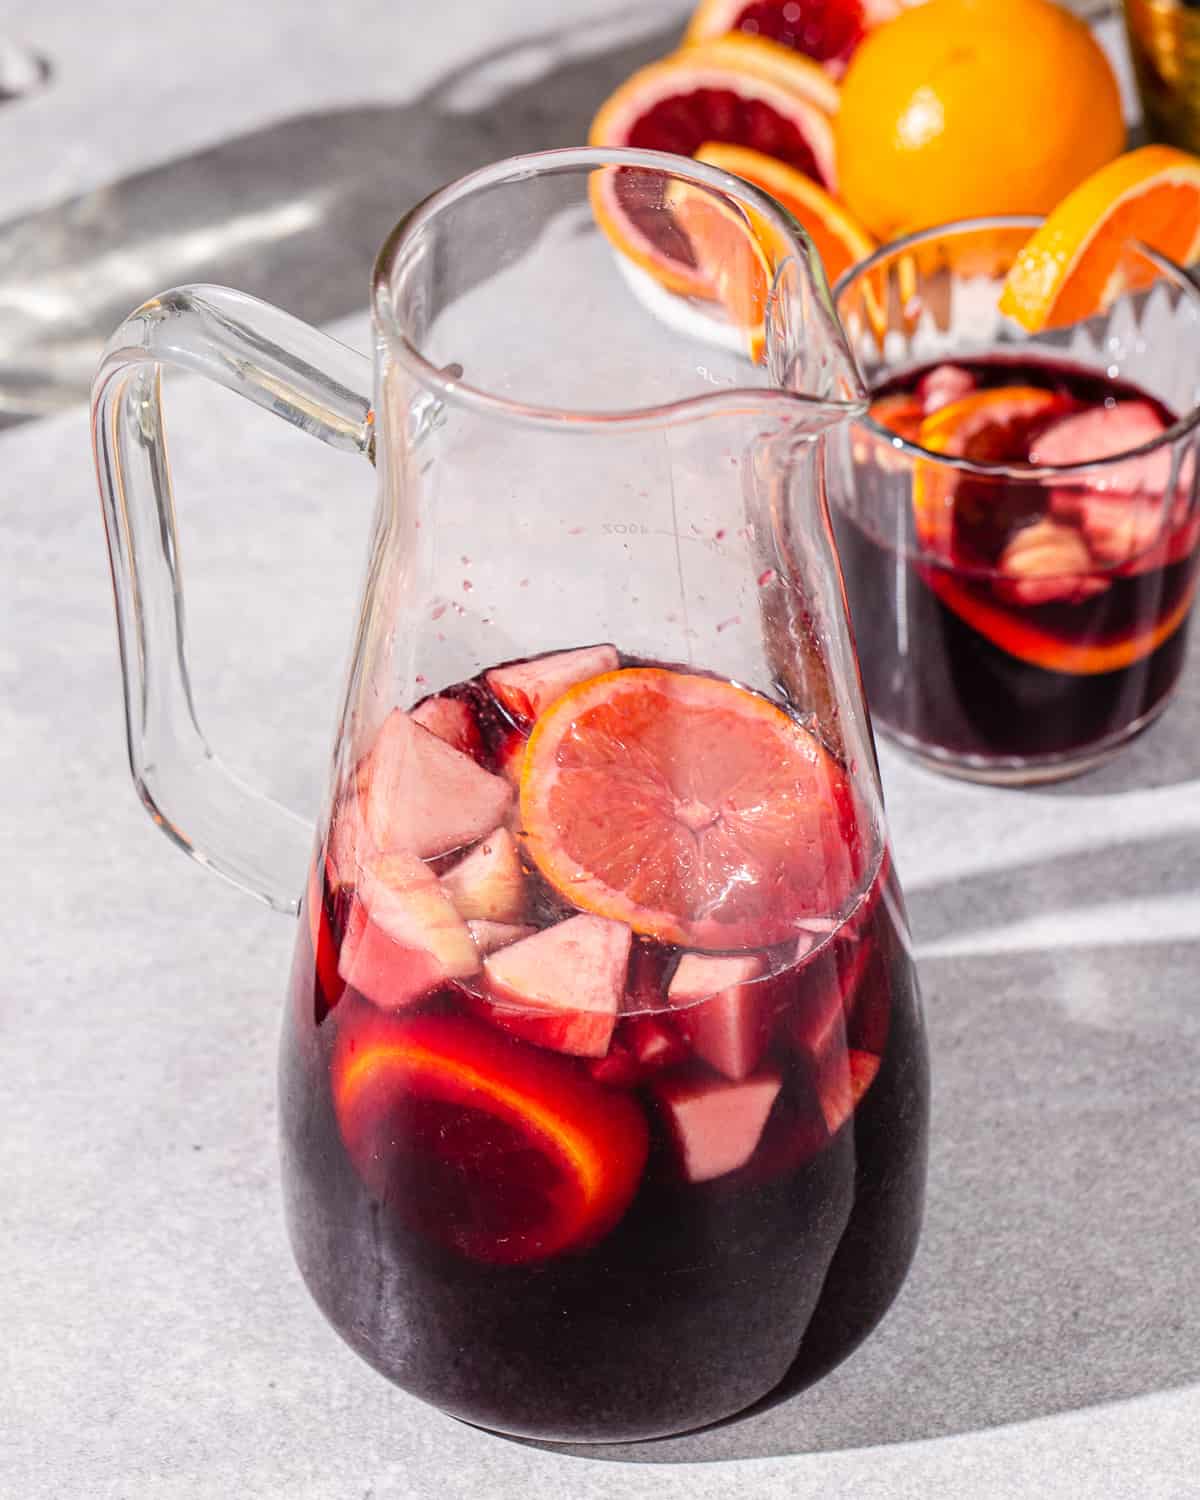 Glass pitcher full of non-alcoholic sangria on a gray countertop. A smaller glass of the sangria is on the right of the pitcher. The drink has cut up apples and orange slices floating in it.